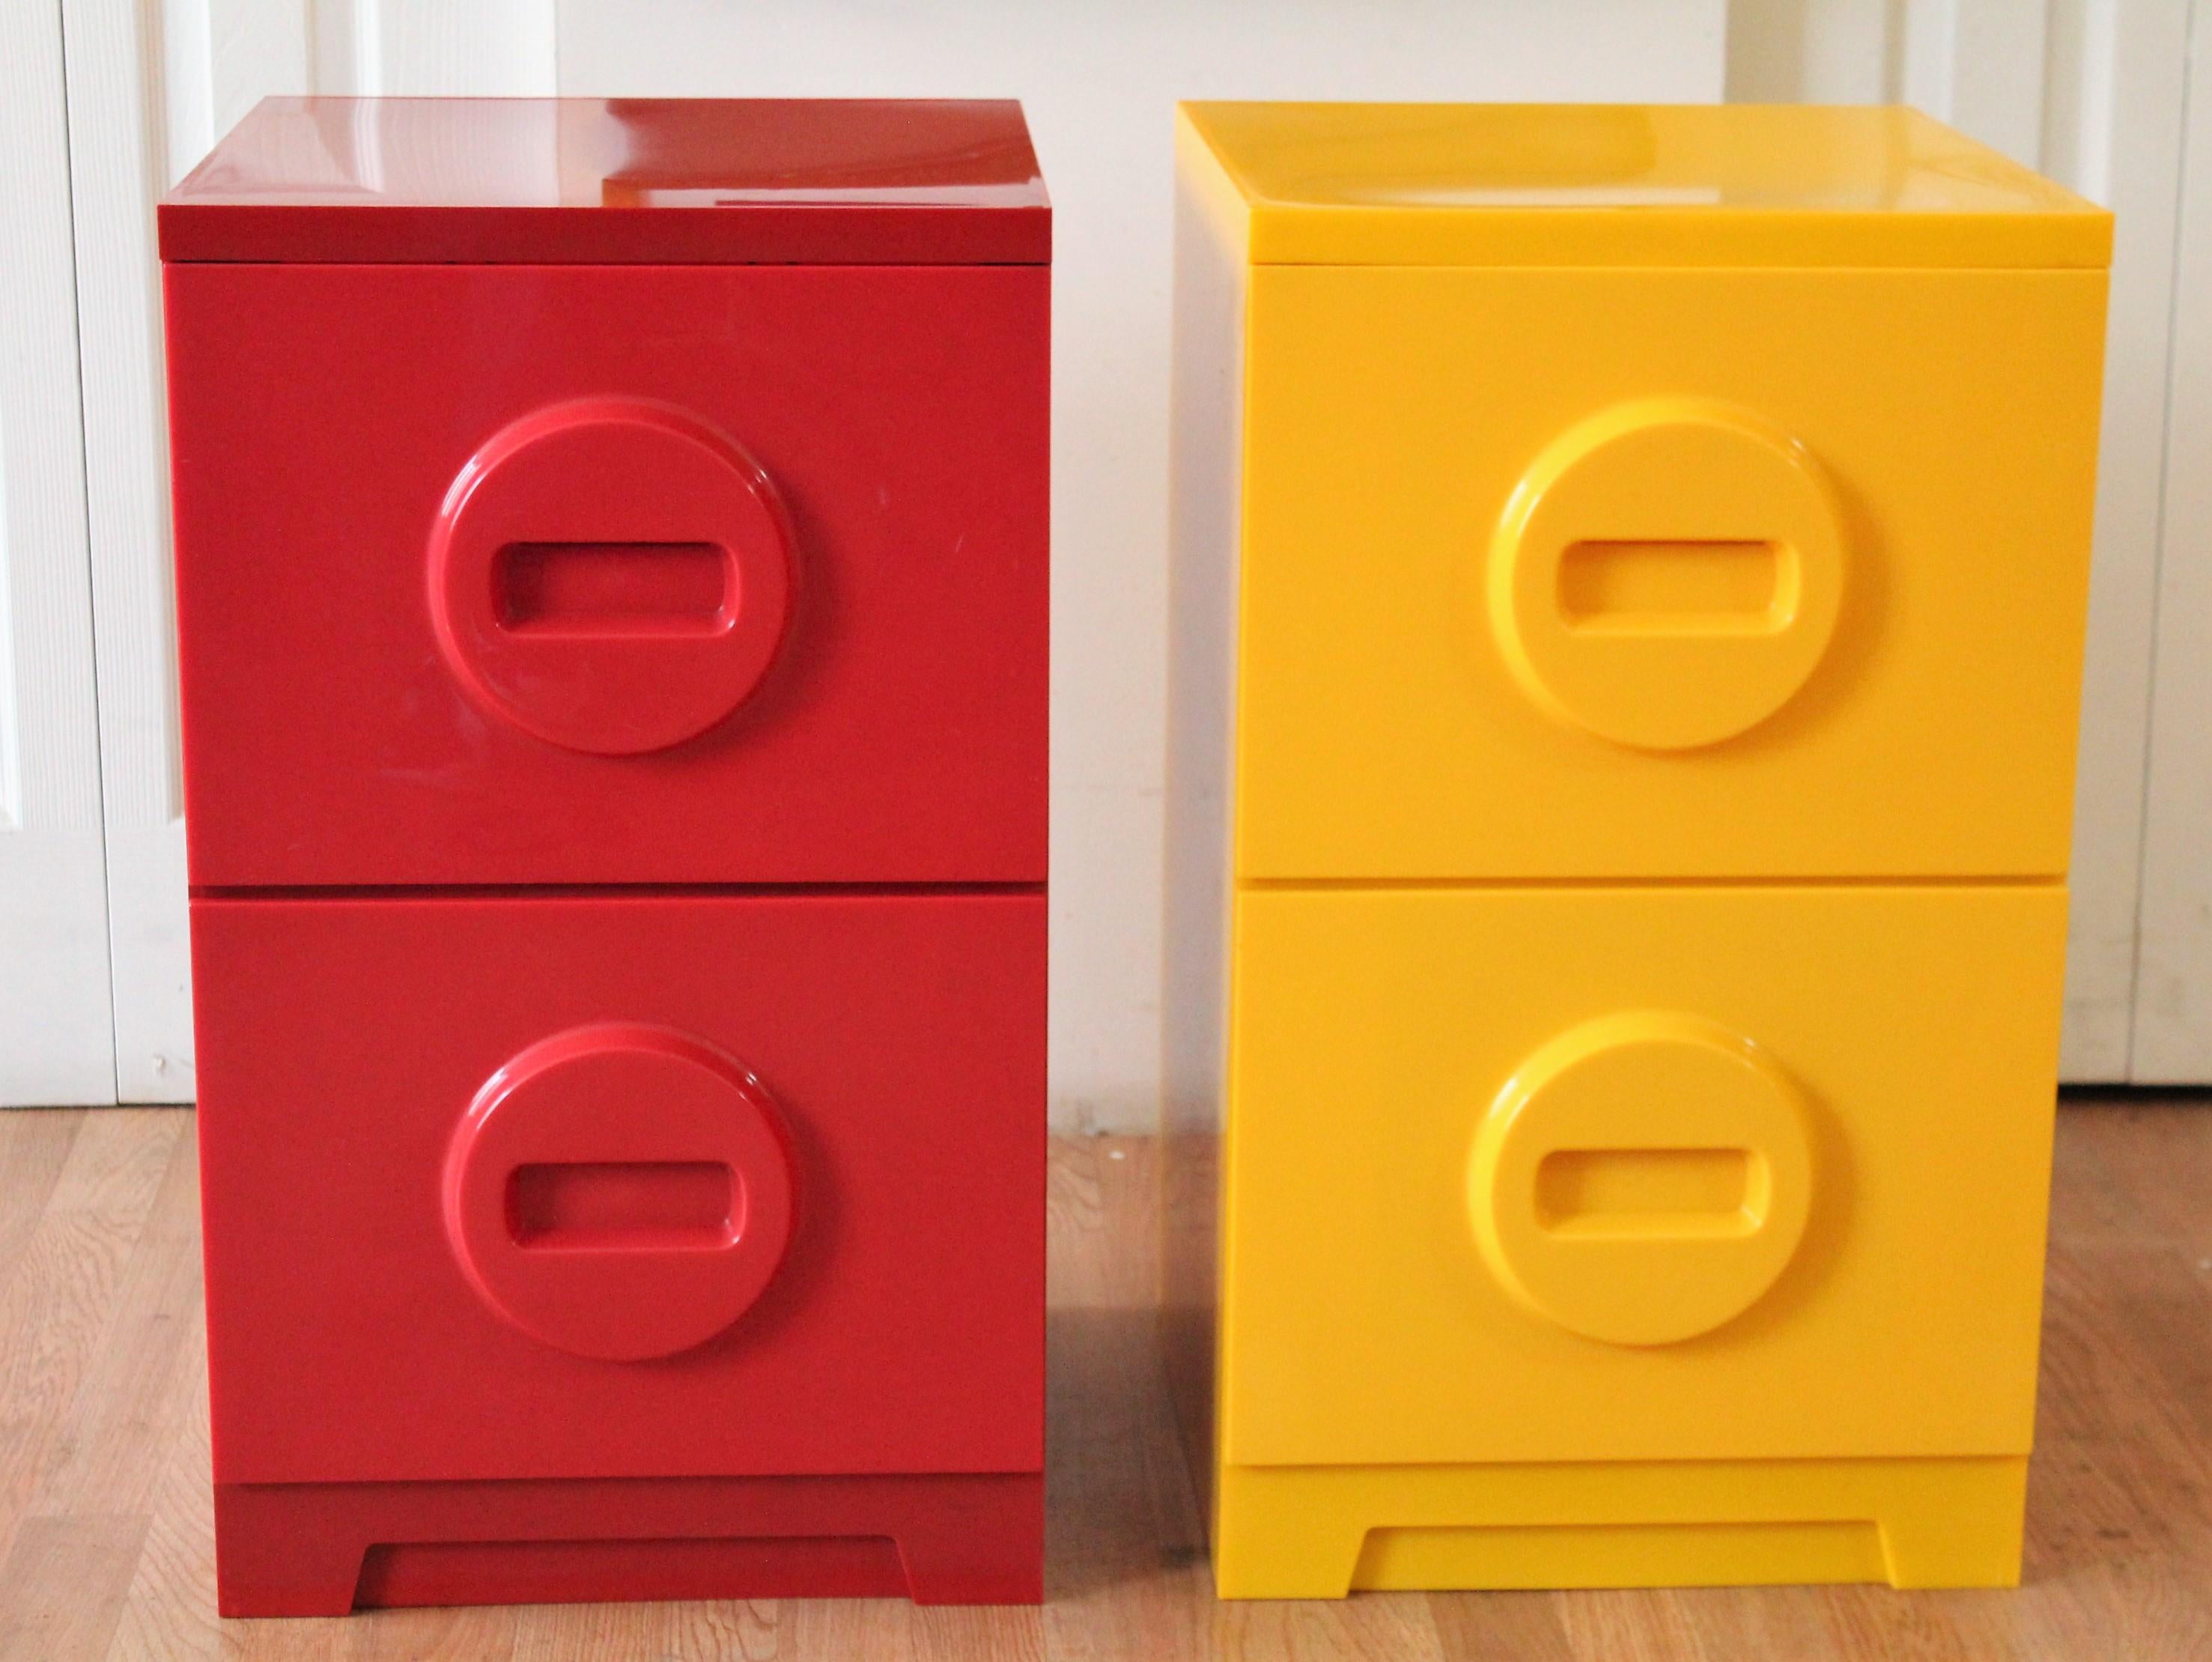 File in style with a 1970s Akro-Mils plastic filing cabinet in bright yellow and a deep red. Two drawers with a cool Lego-esque handle on each.